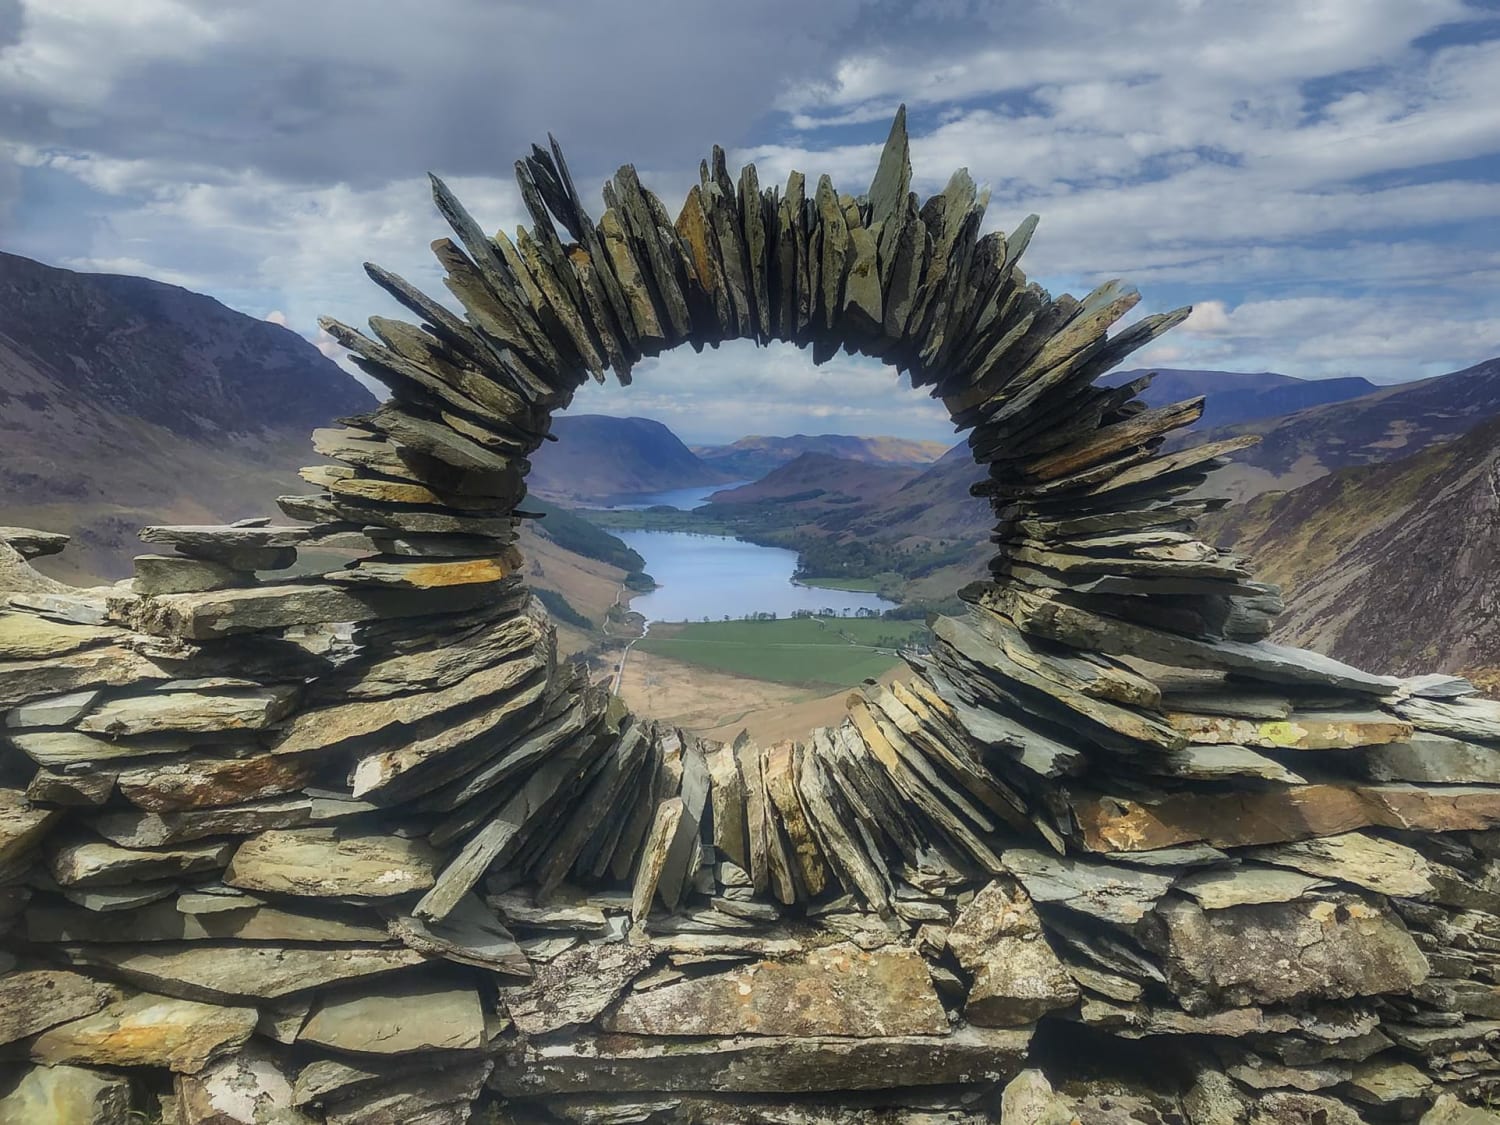 ITAP of the Stargate at Buttermere (Lake District)